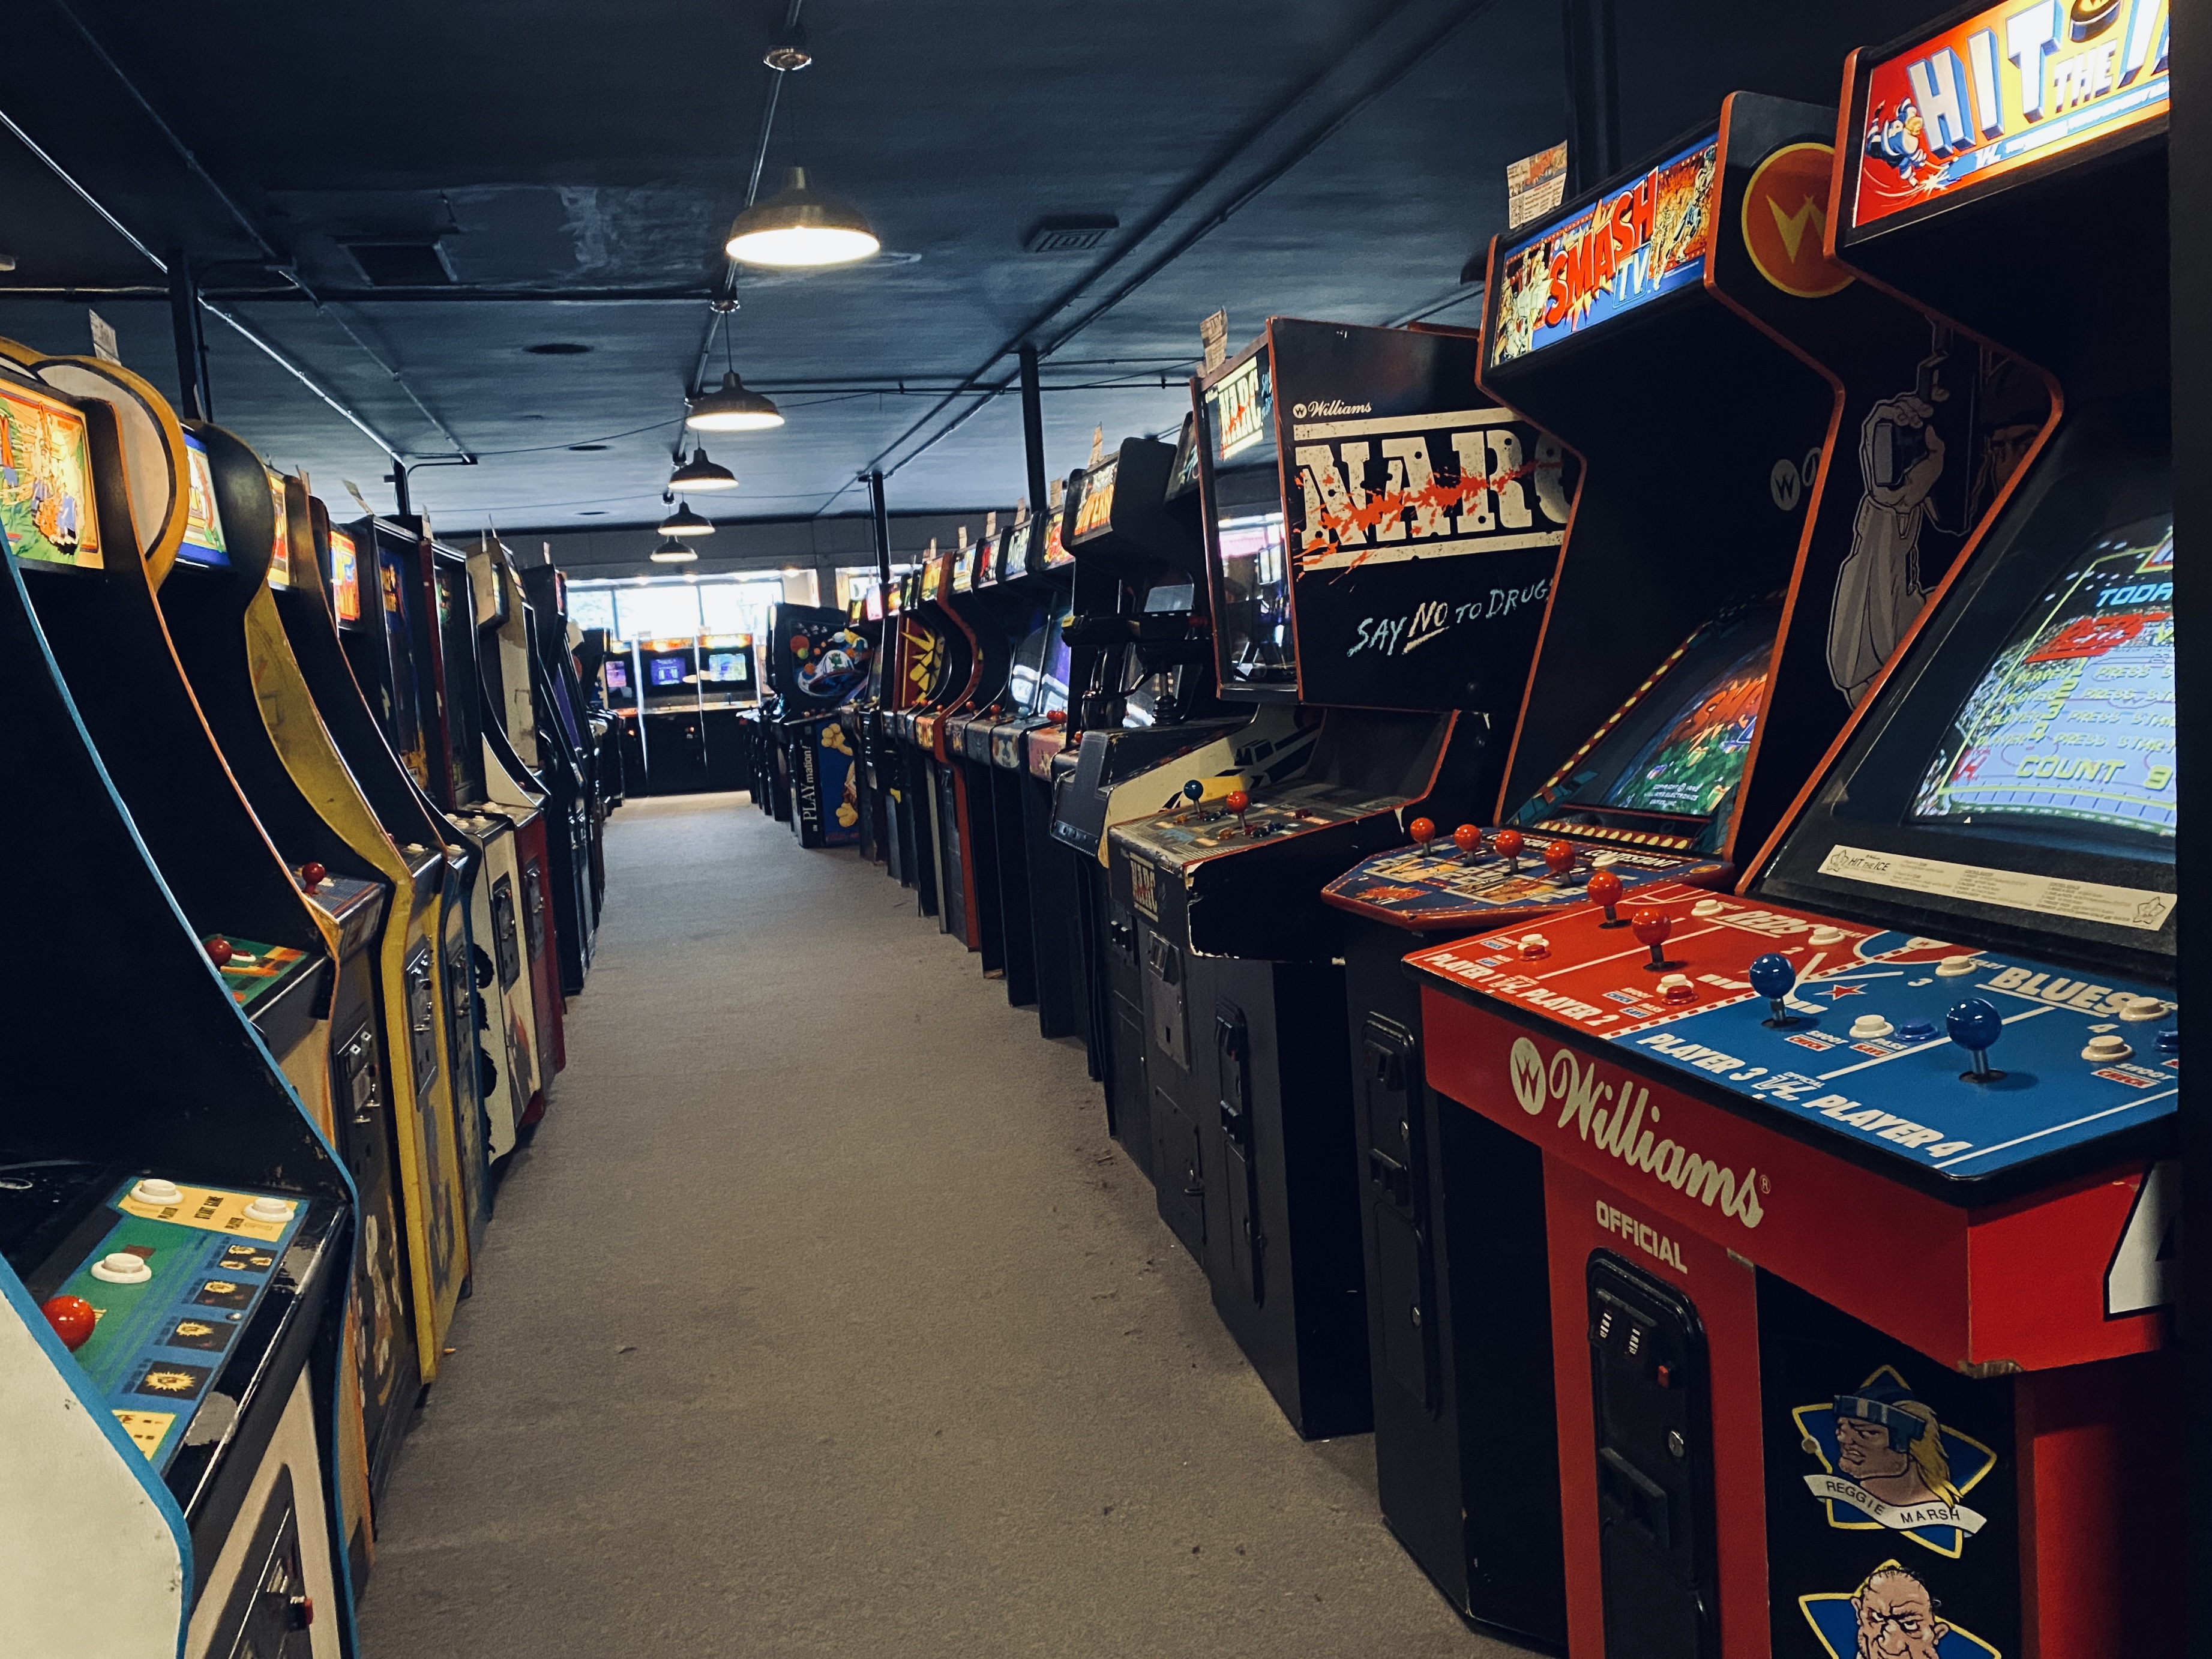 An empty aisle lined with vintage video game cabinets